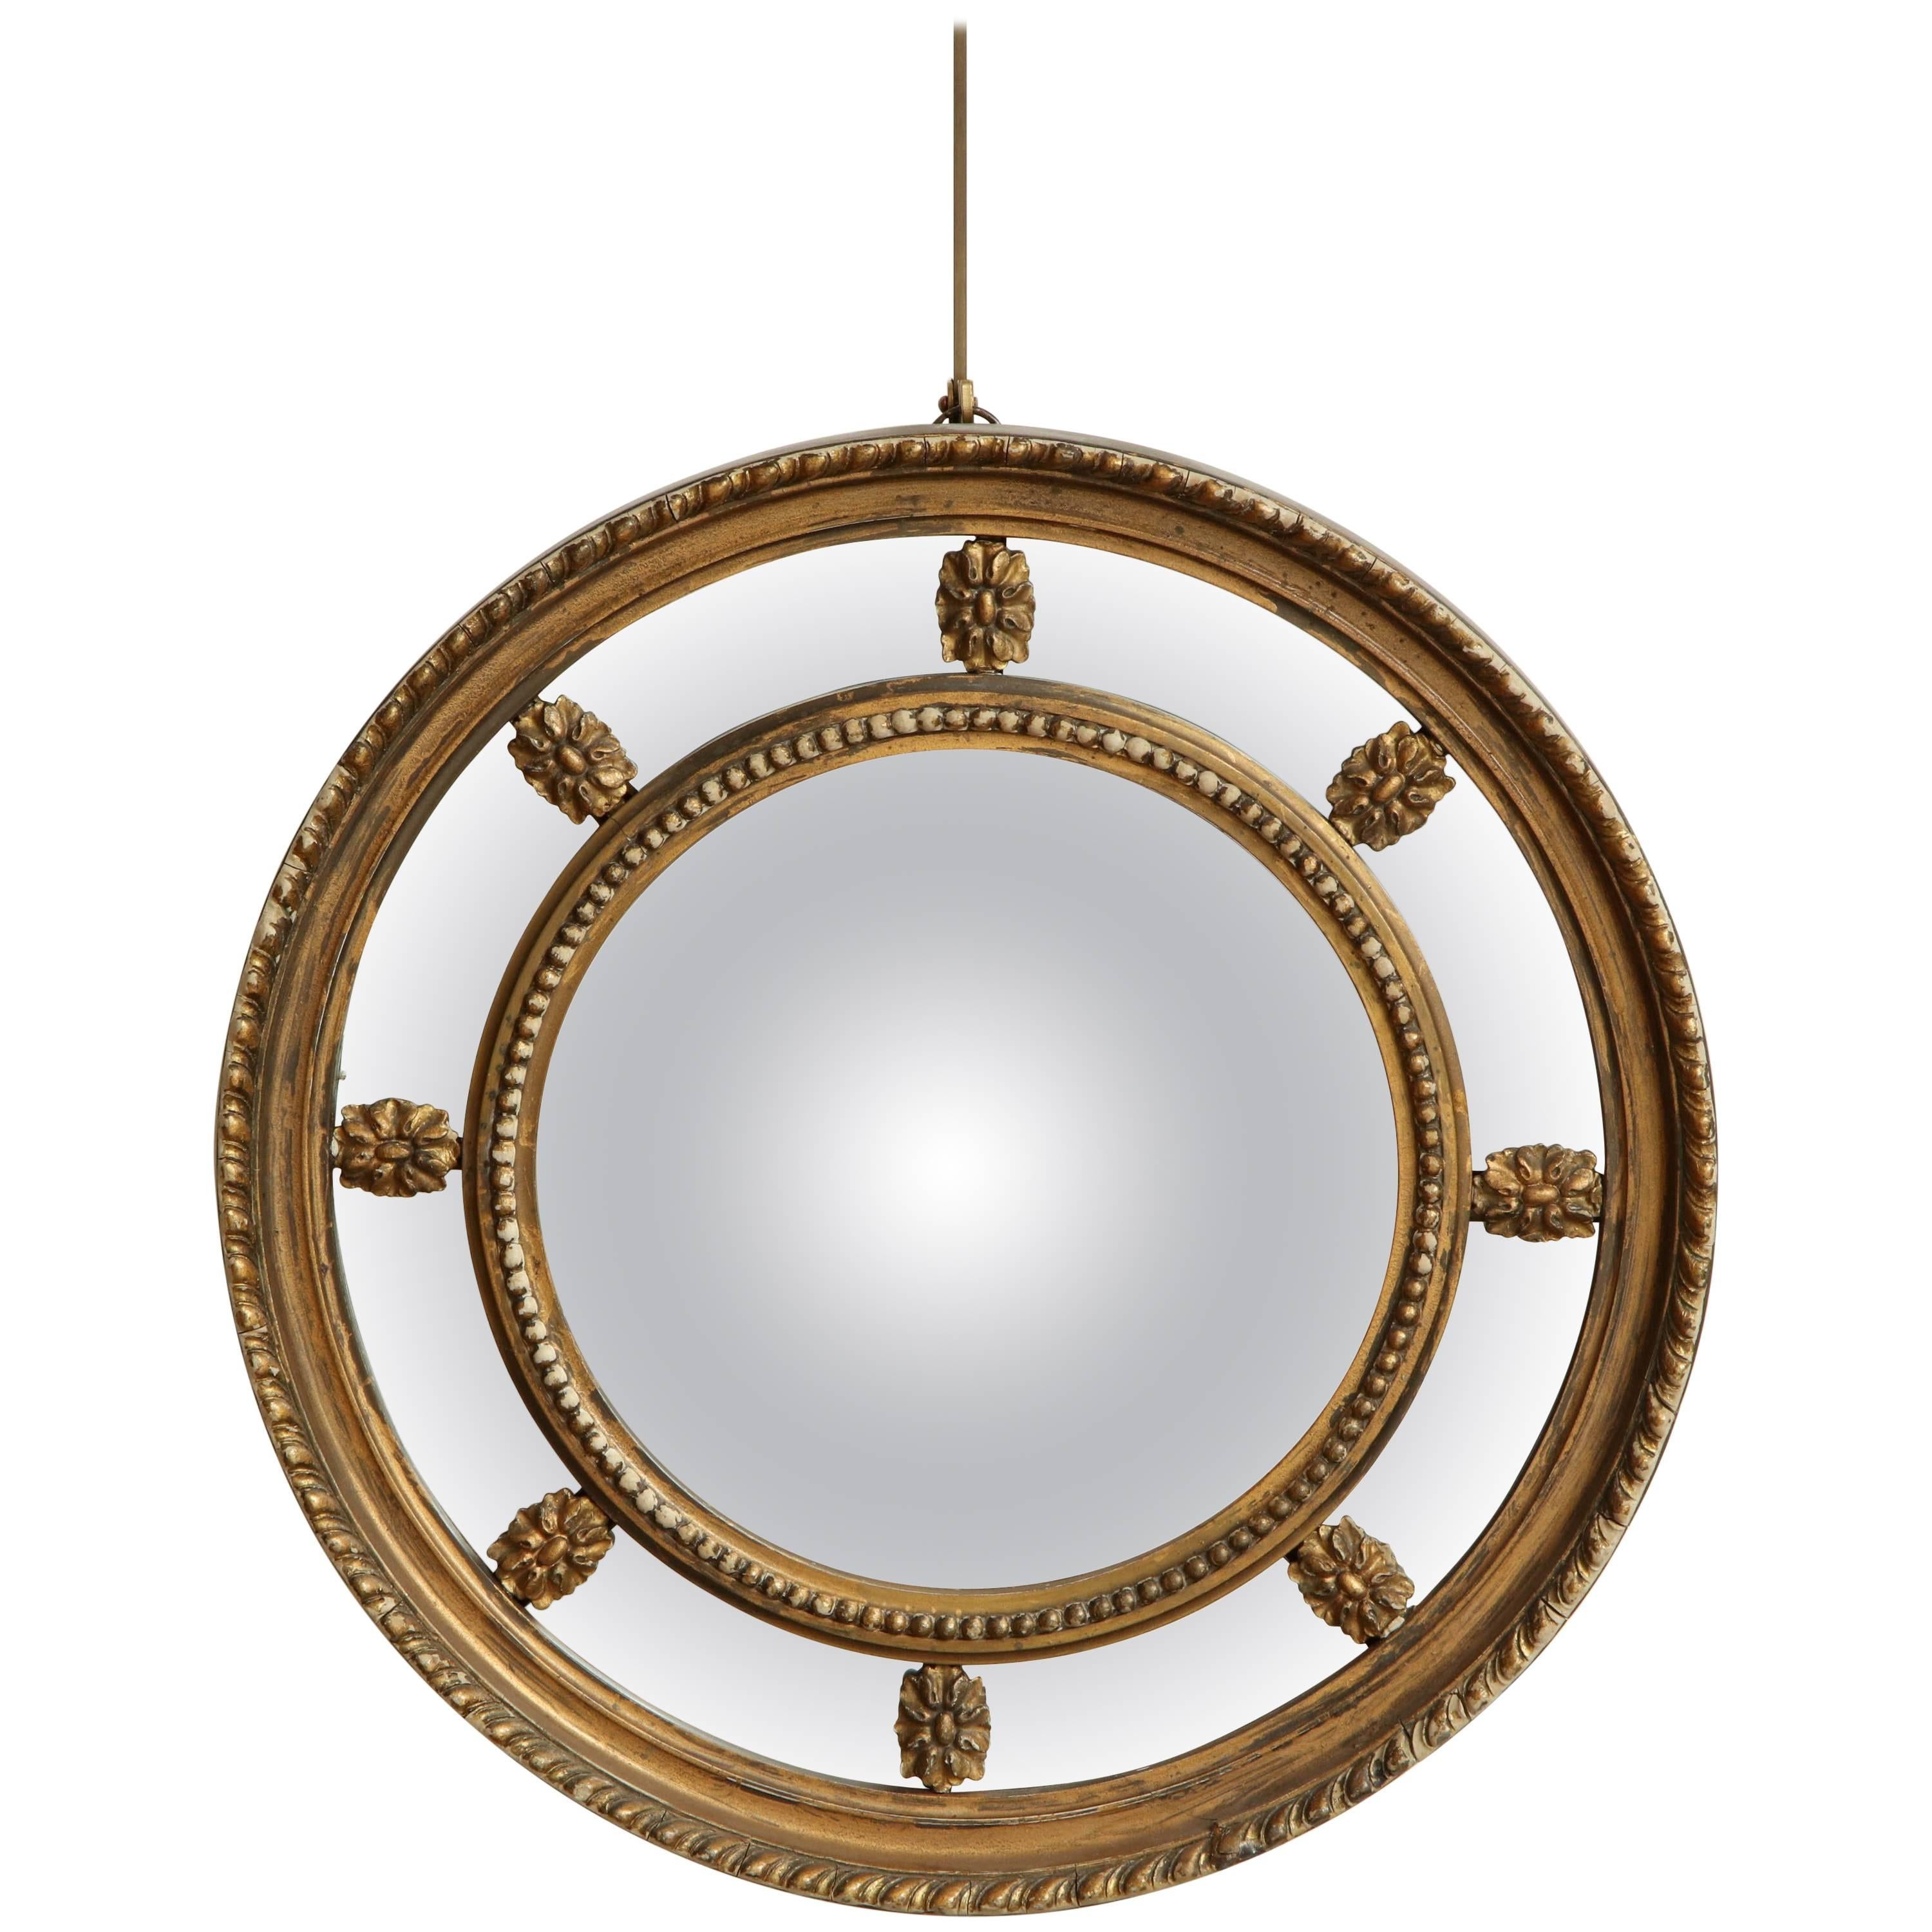 19th Century English, Sectionalized Convex Mirror For Sale